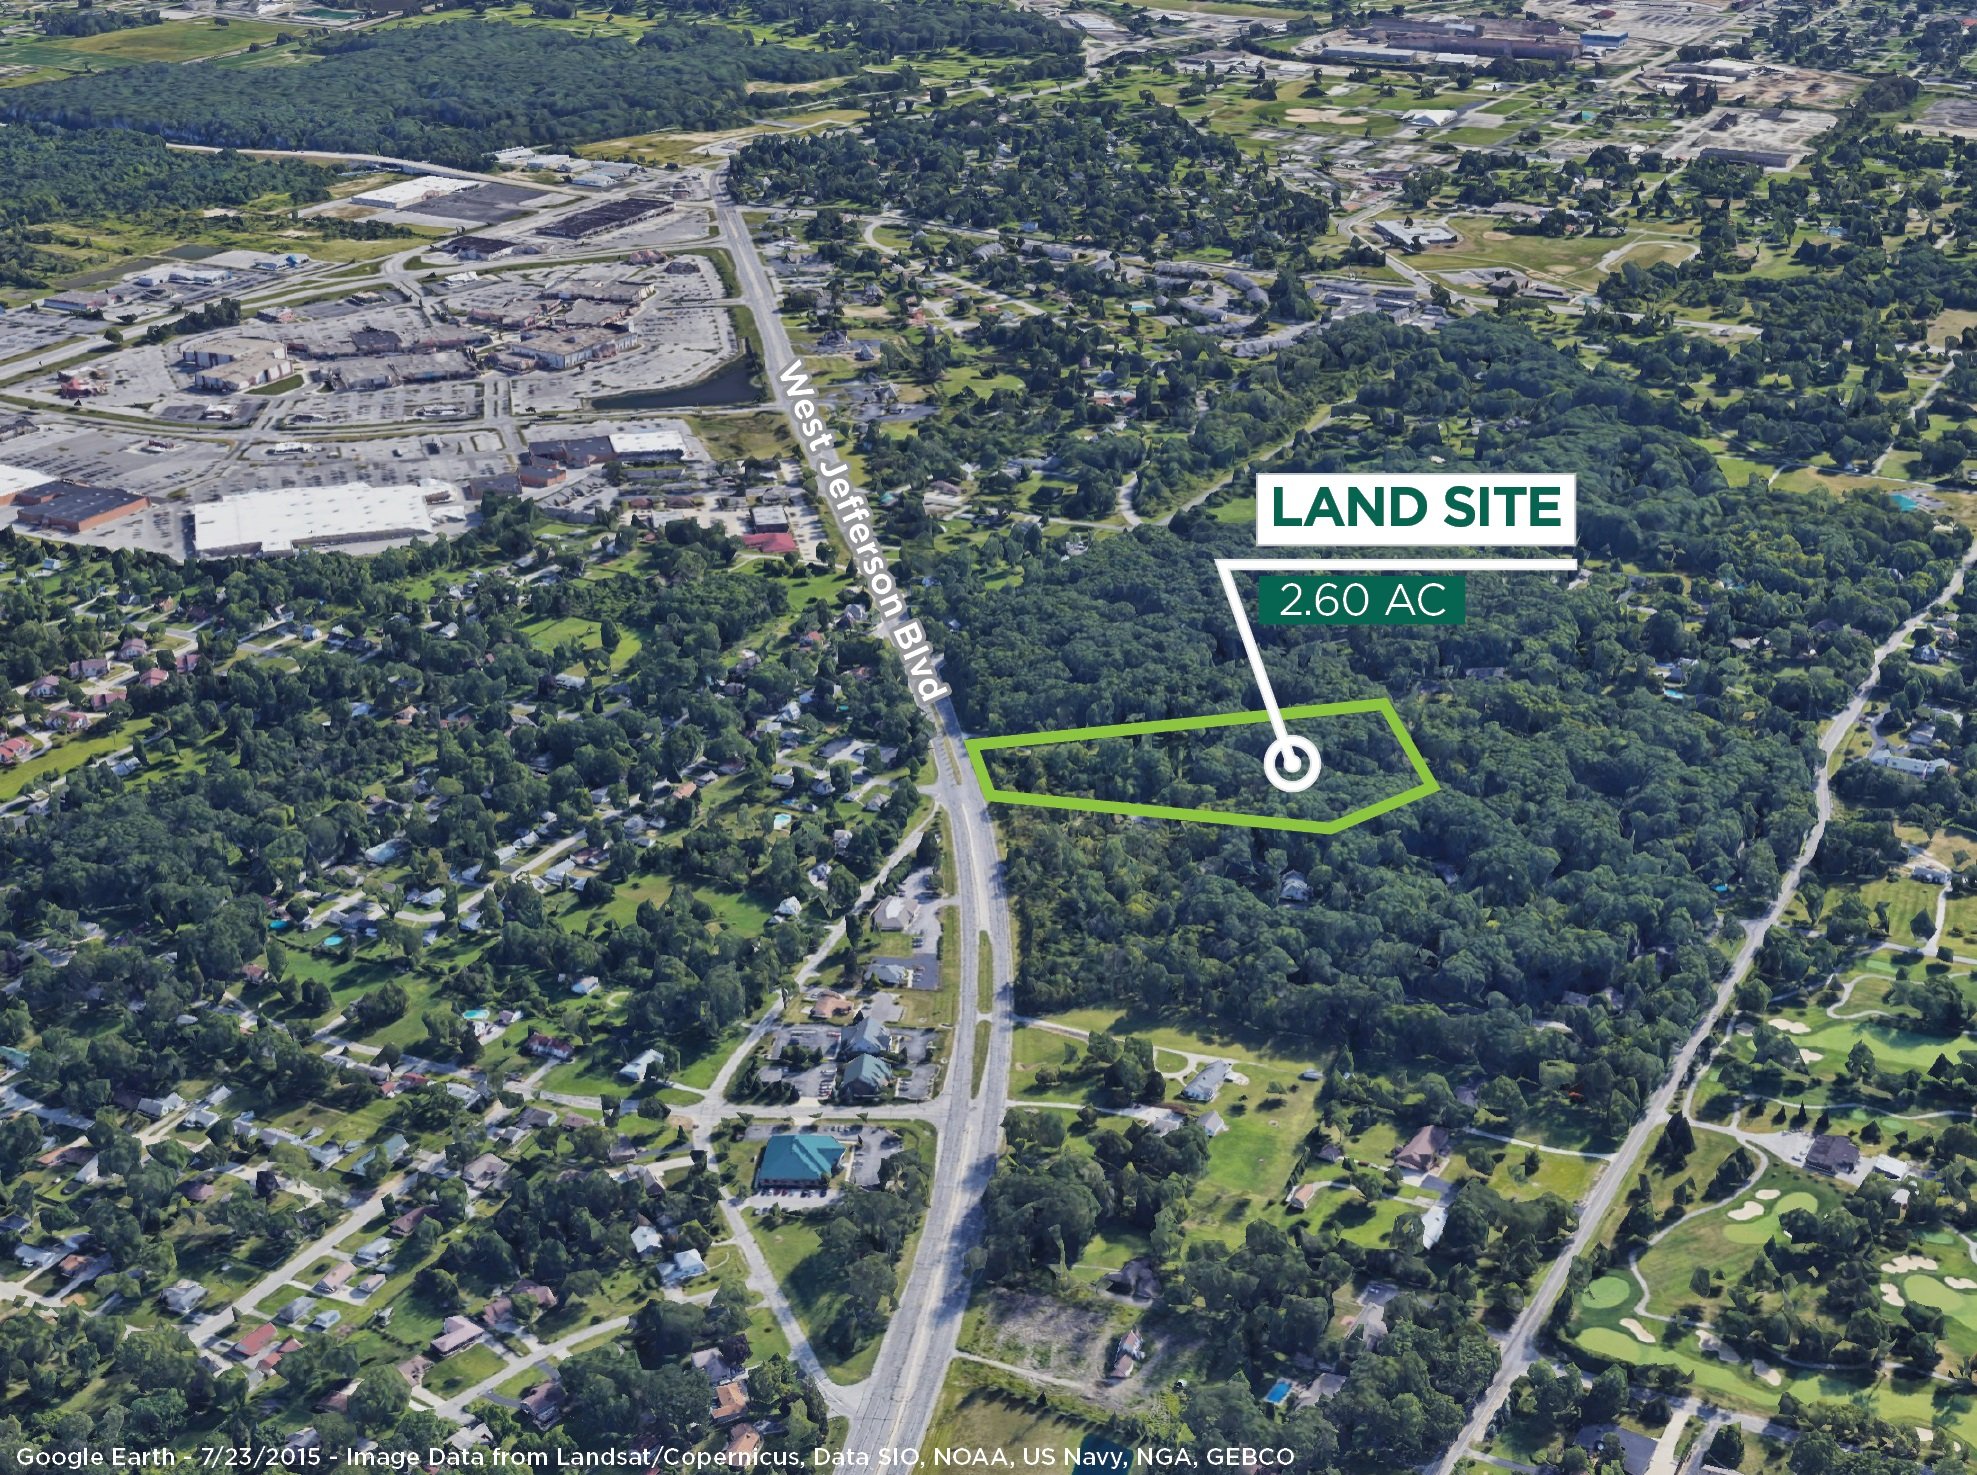 Sturges Property Group - 4827 W Jefferson Blvd, Fort Wayne, IN 46804, Commercial Land